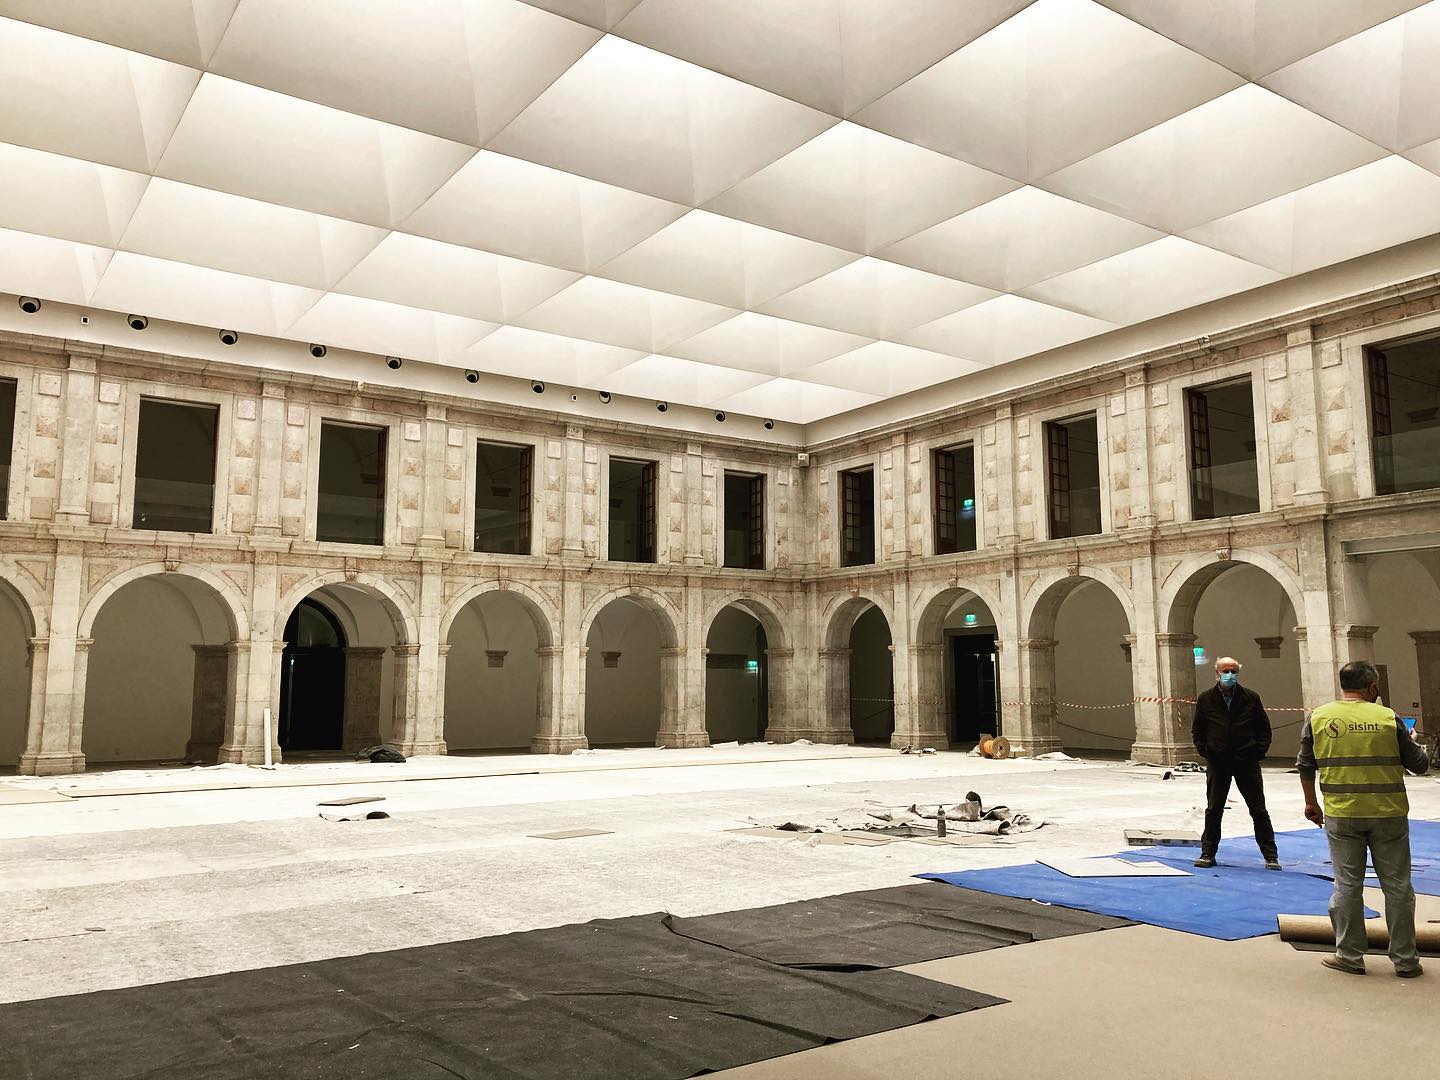 Site visit last week to Convento do Beato, aiming and focusing for this great project. Works nearing completion. #architecture by @riscoarchitecture #lightingdesign by Filamento